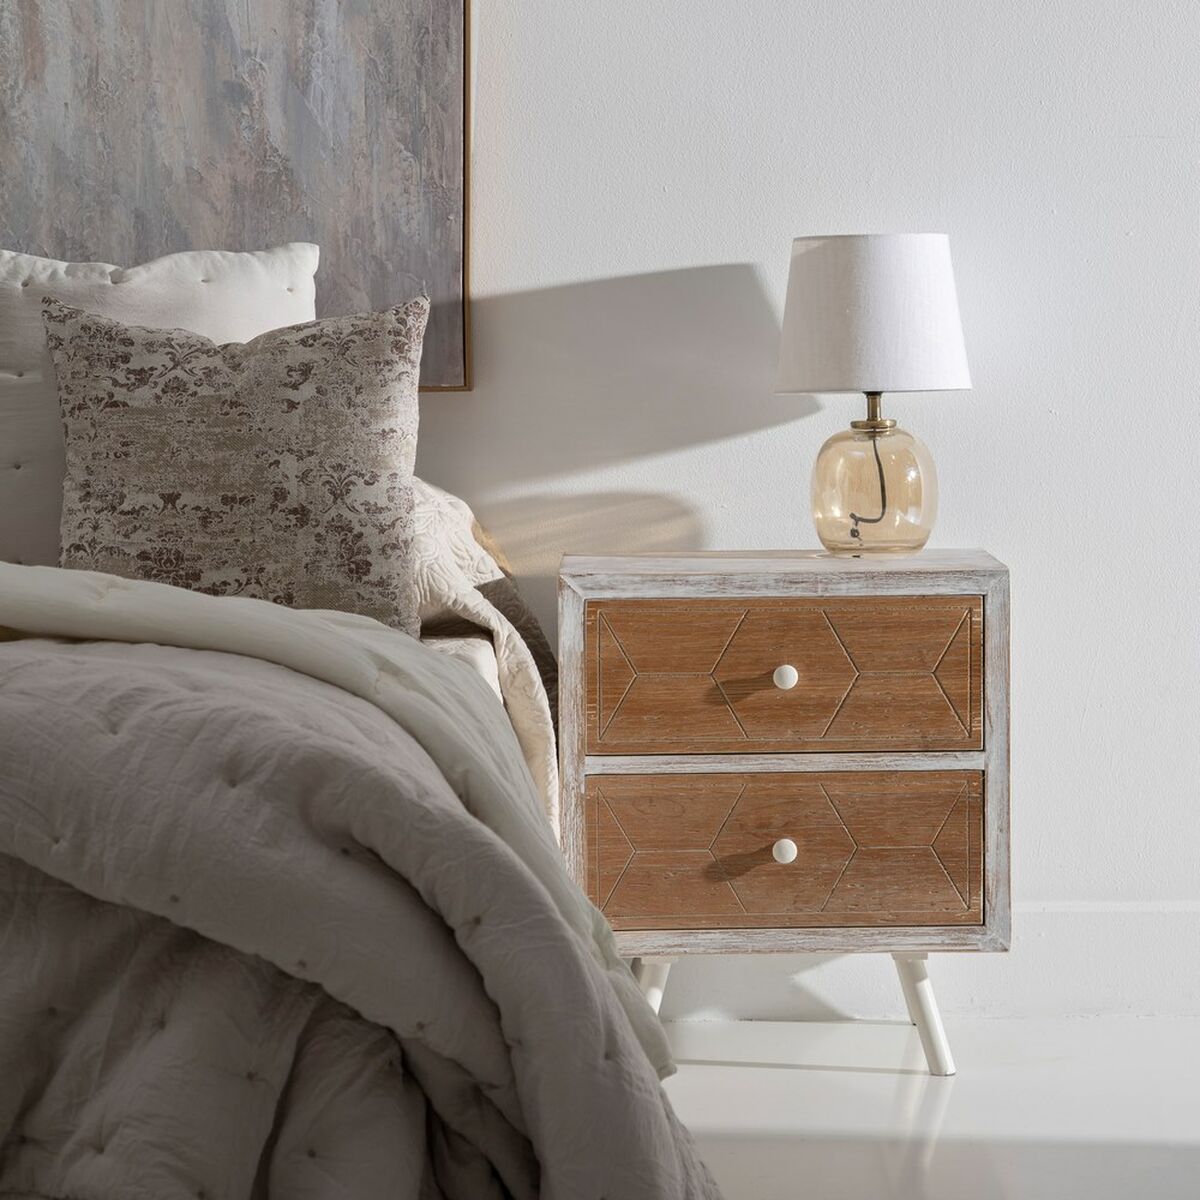 White Wood Bedside Table (50 x 35 x 55 cm)